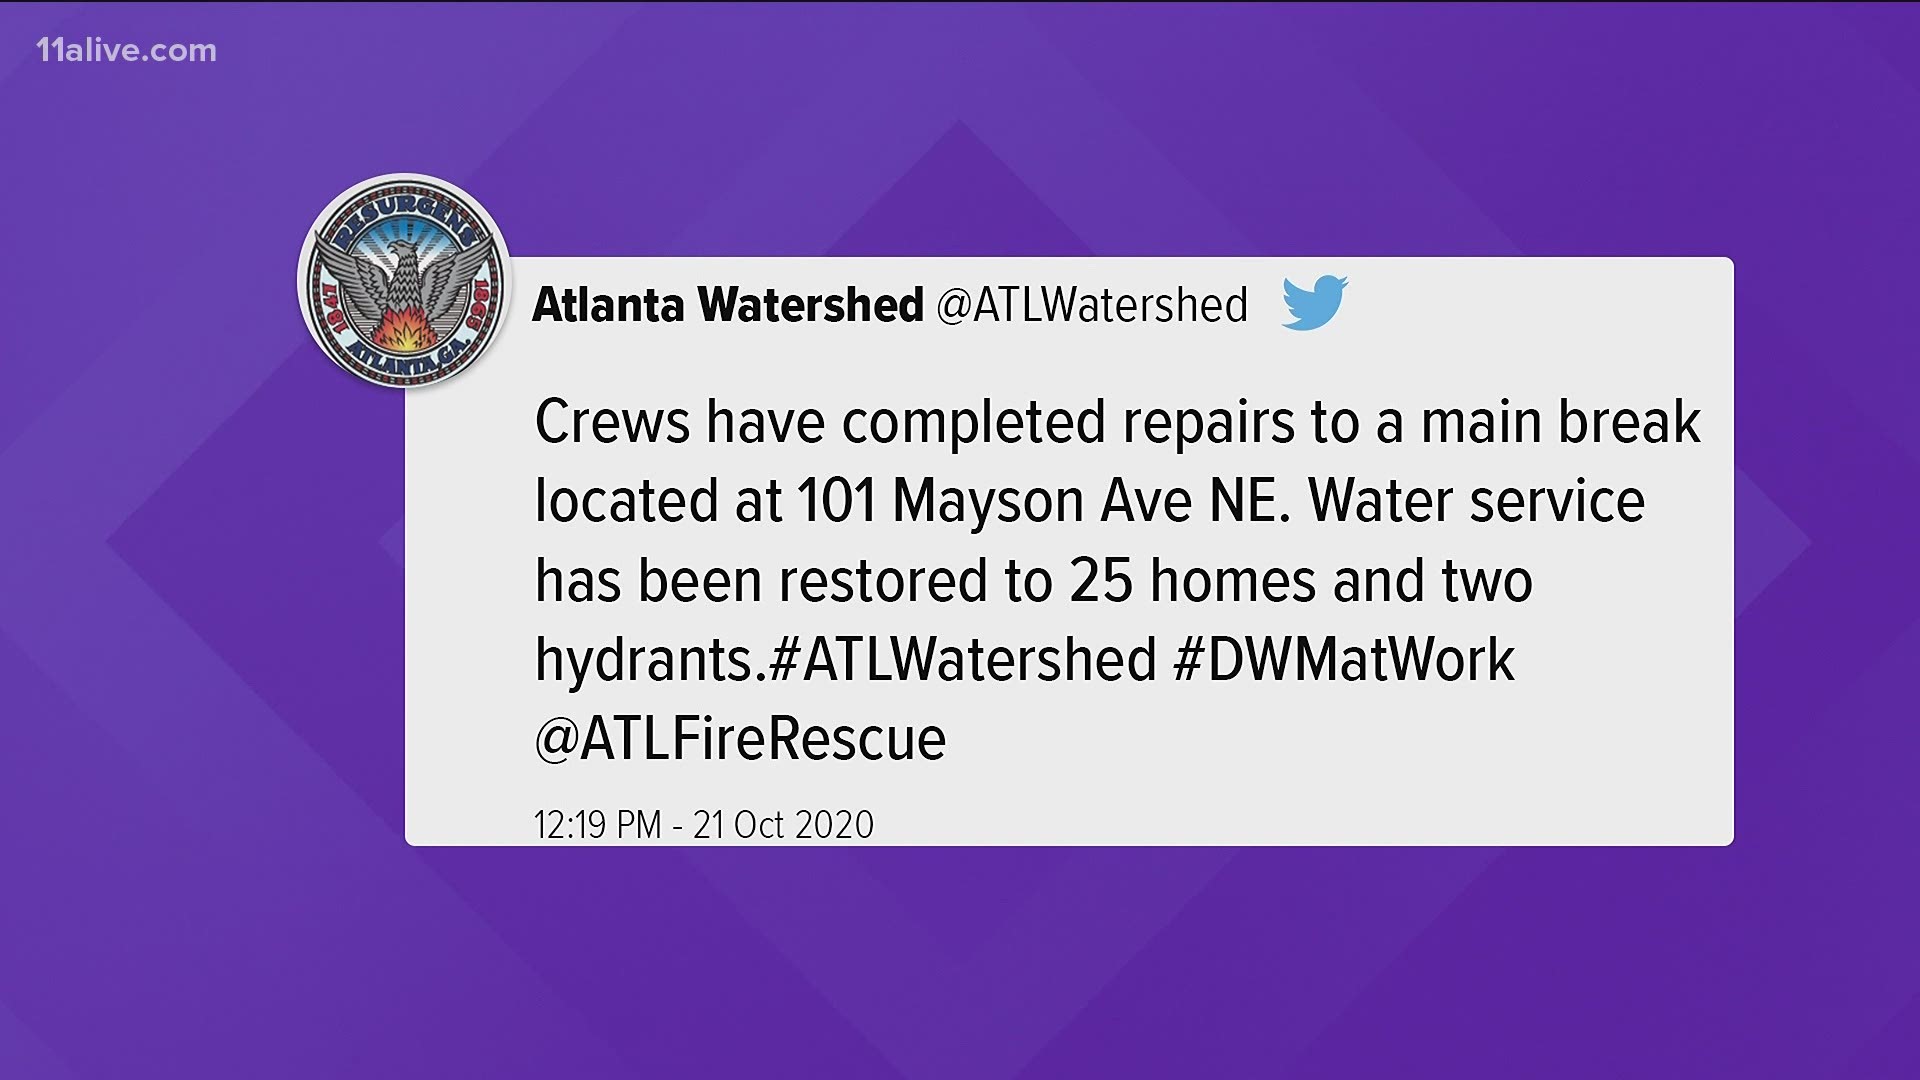 The breaks are unrelated, but caused outages for several homes across Atlanta.